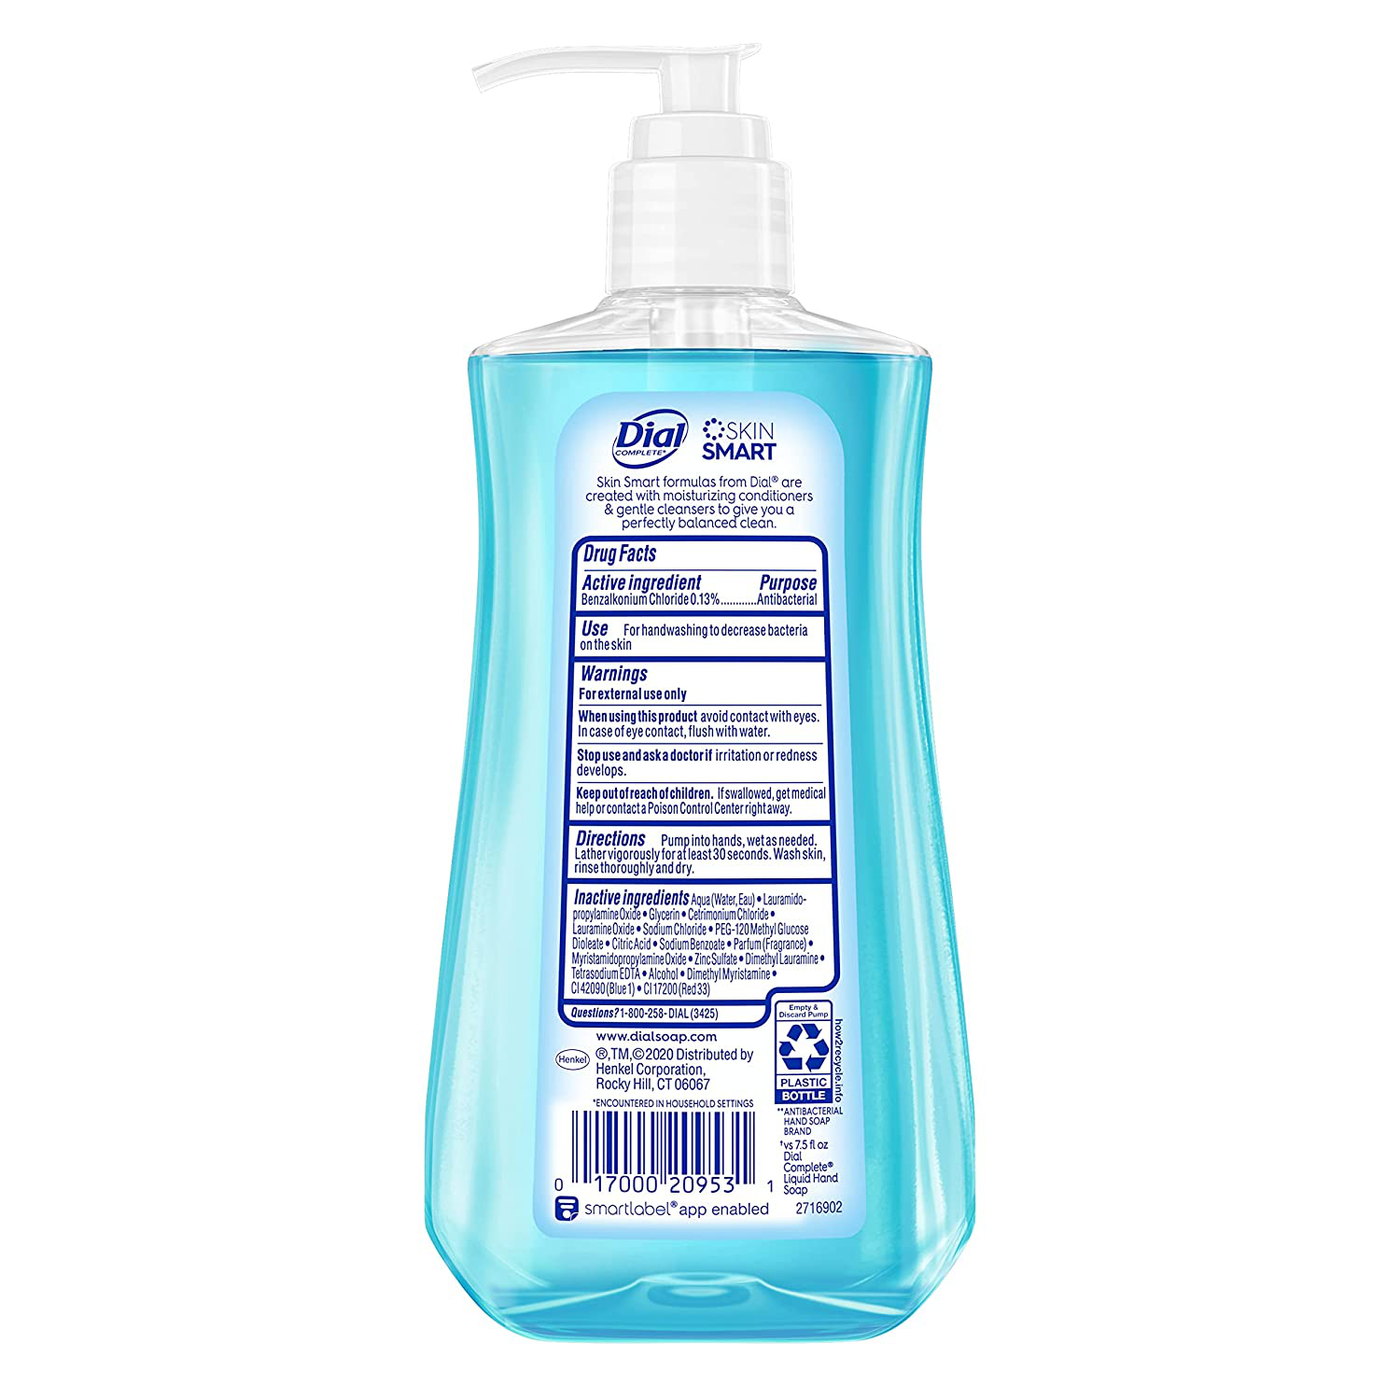 Dial Antibacterial Liquid Hand Soap, Spring Water, 11 Ounce (Pack of 4)